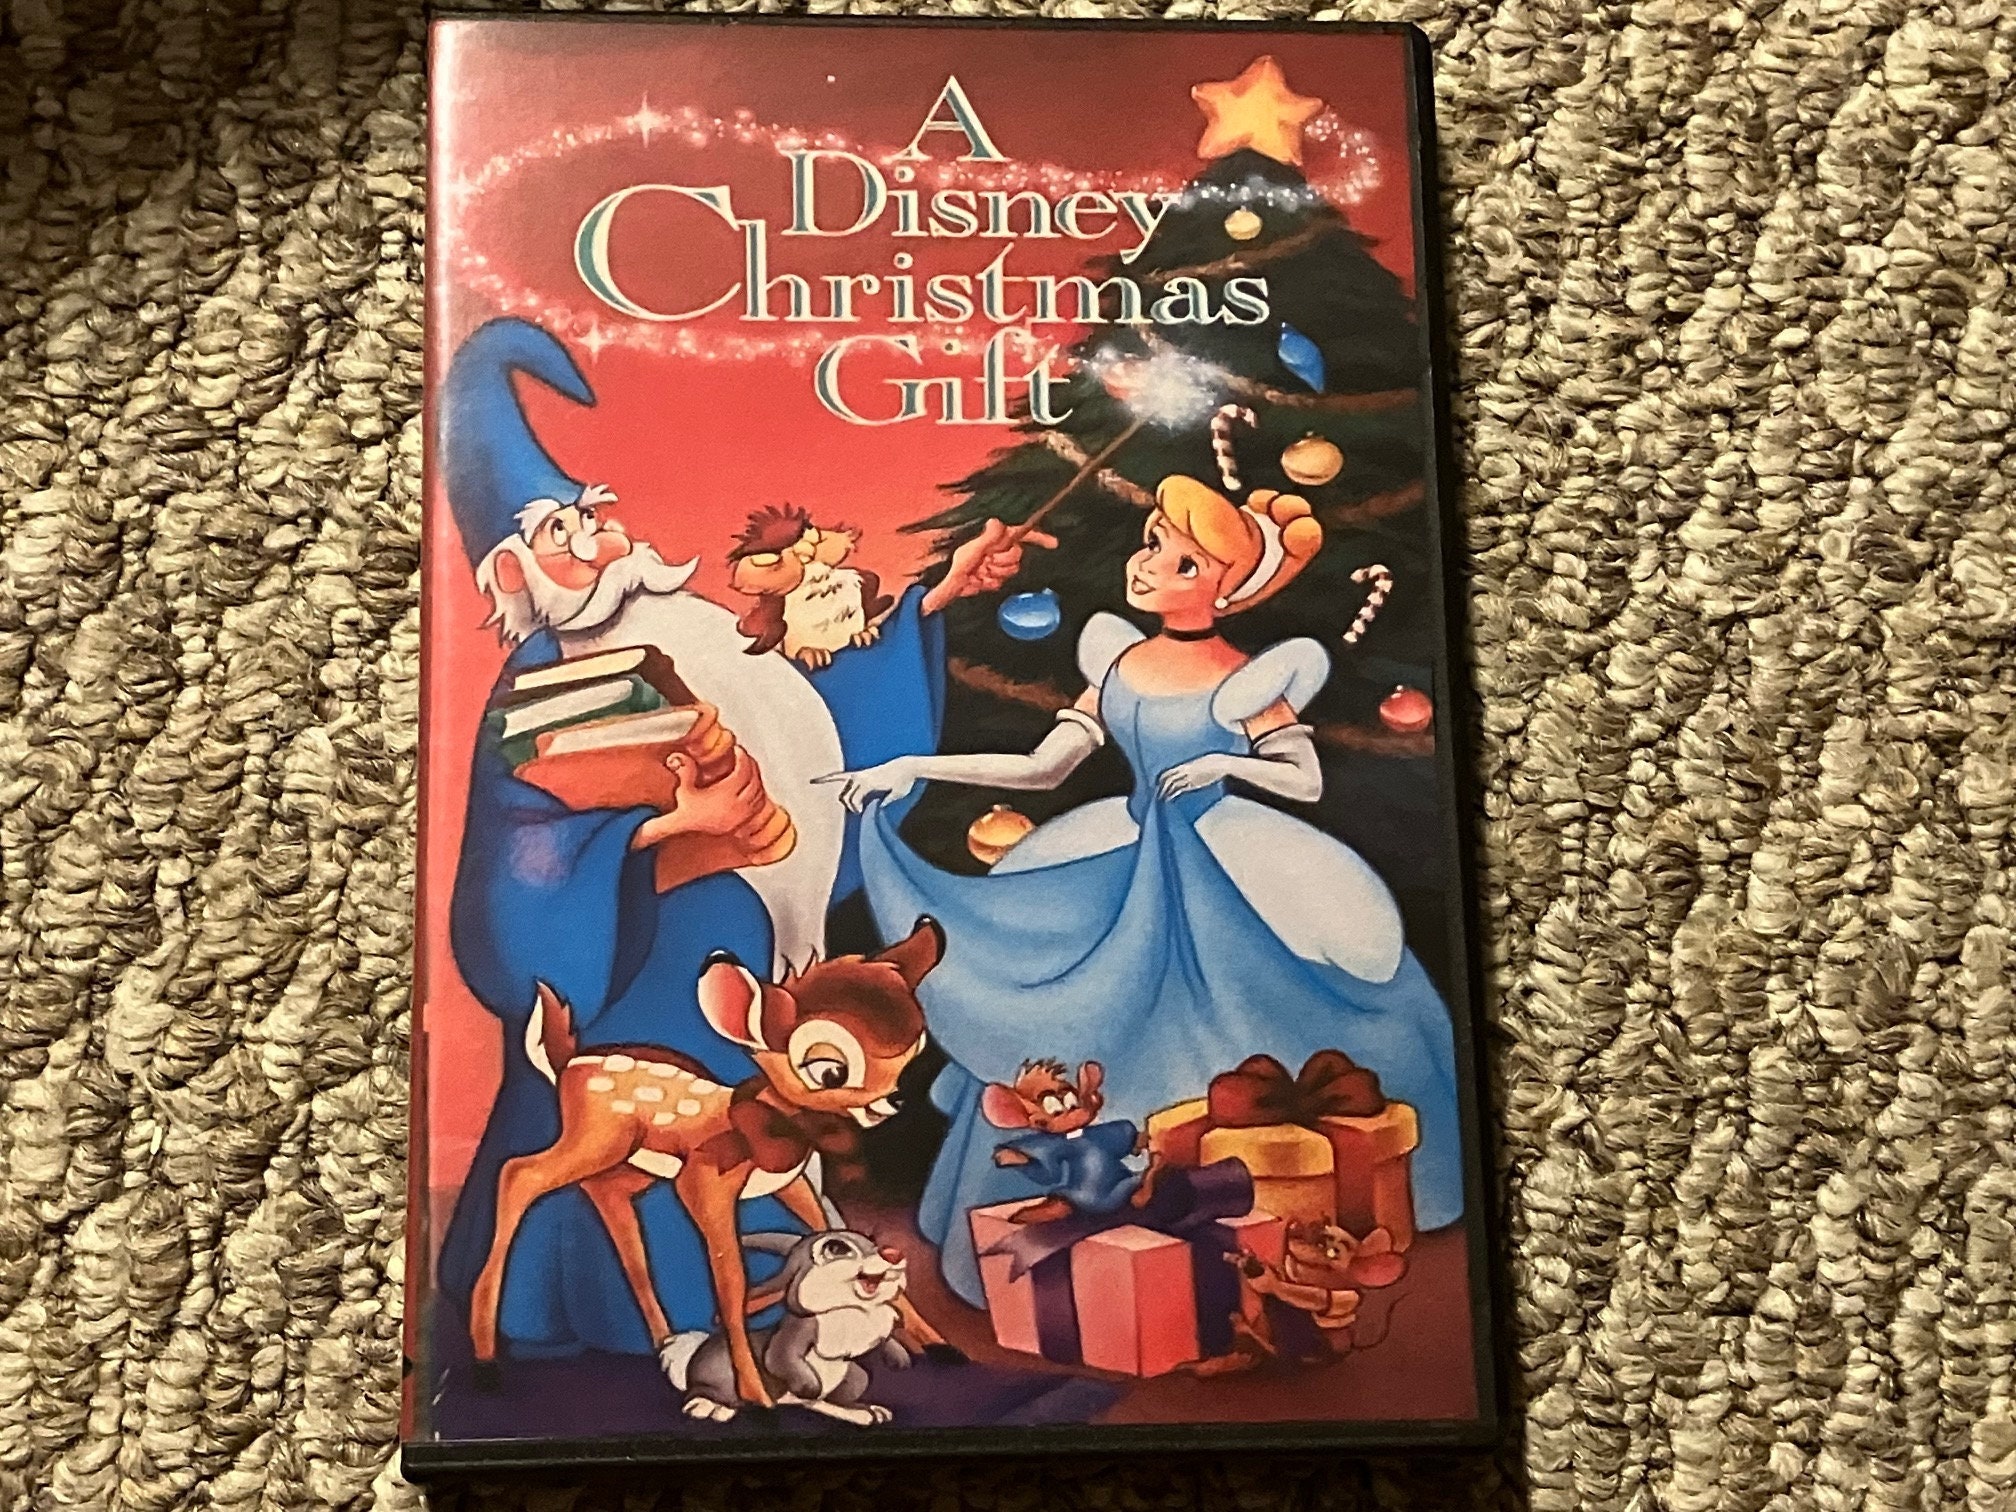 A Disney Christmas Gift Unreleased Fan Made DVD Movie. 1983